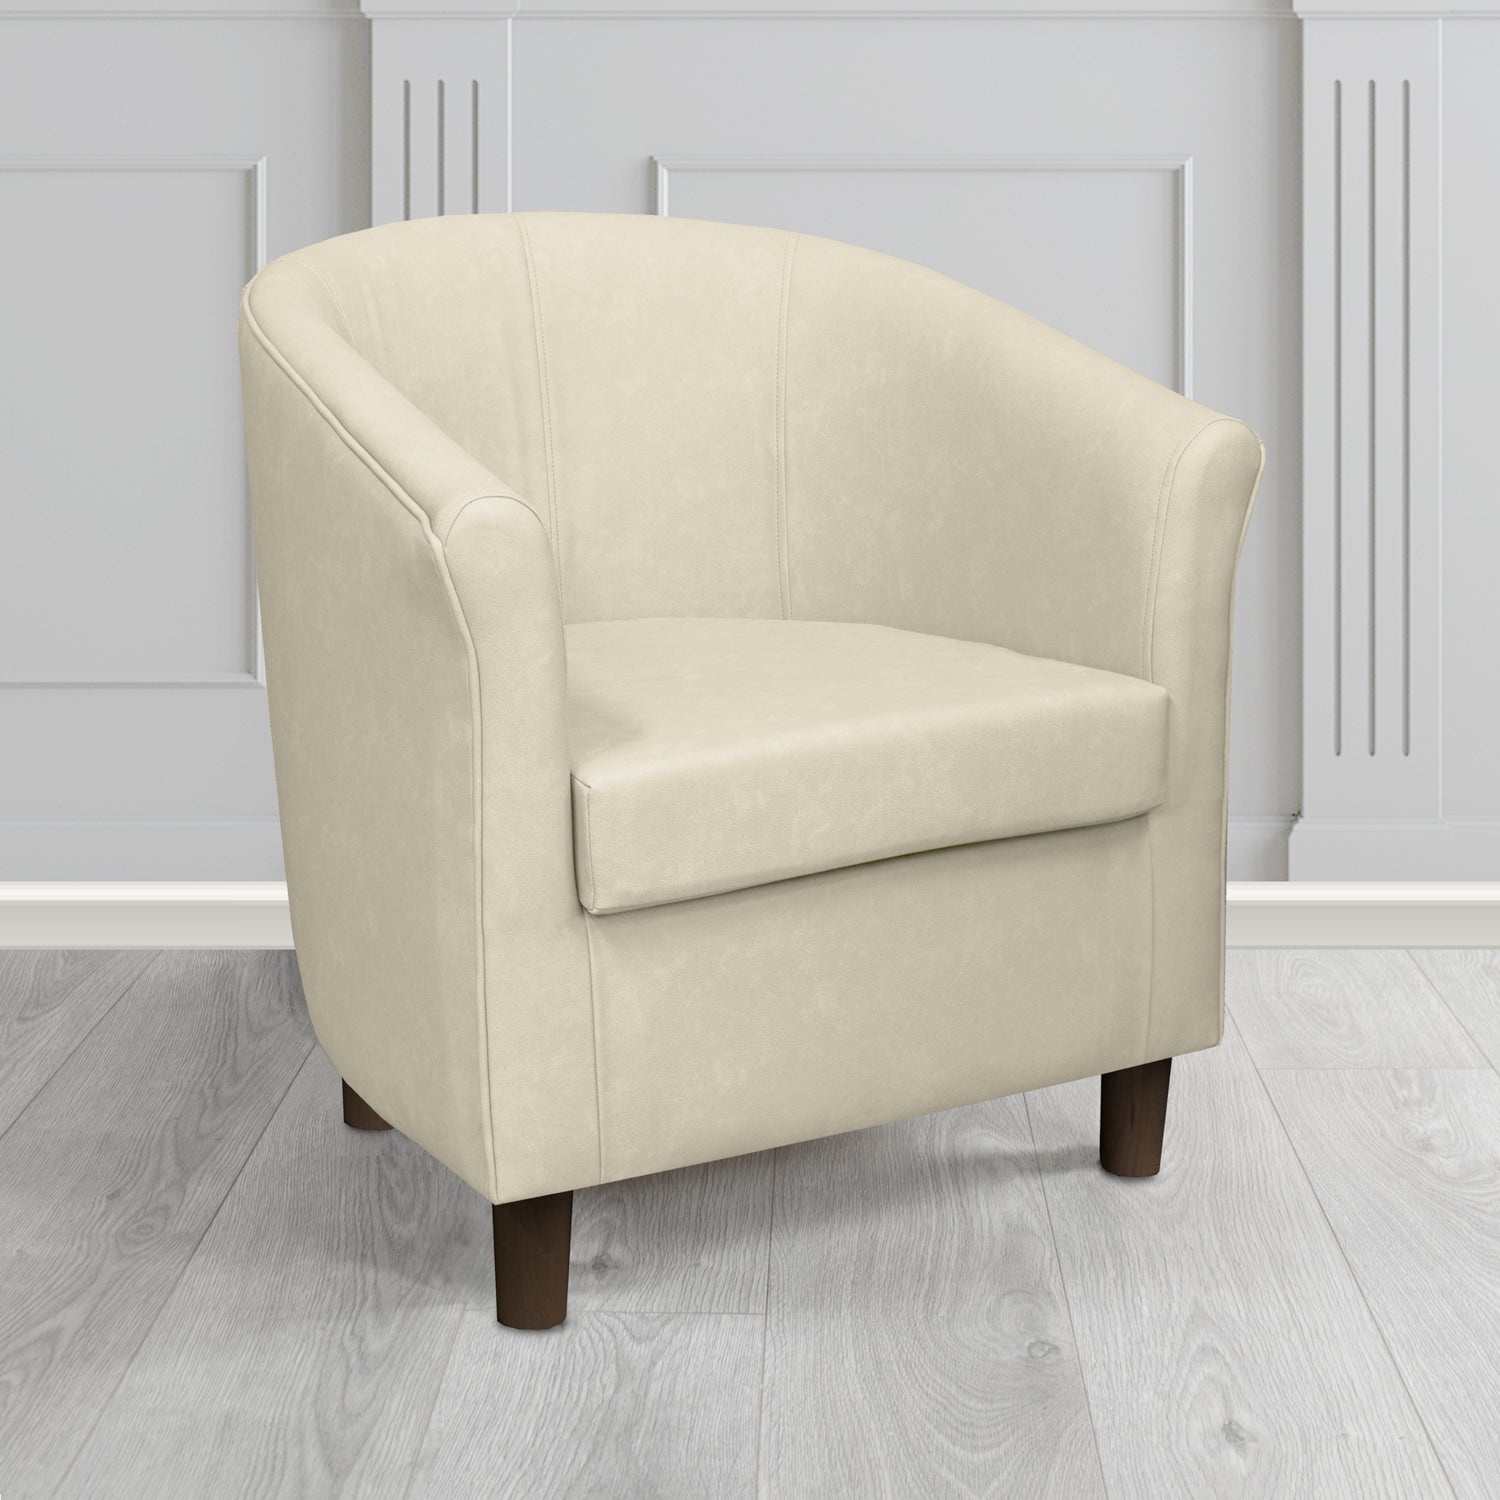 Tuscany Tub Chair in Infiniti Stone INF1844 Antimicrobial Crib 5 Faux Leather - The Tub Chair Shop